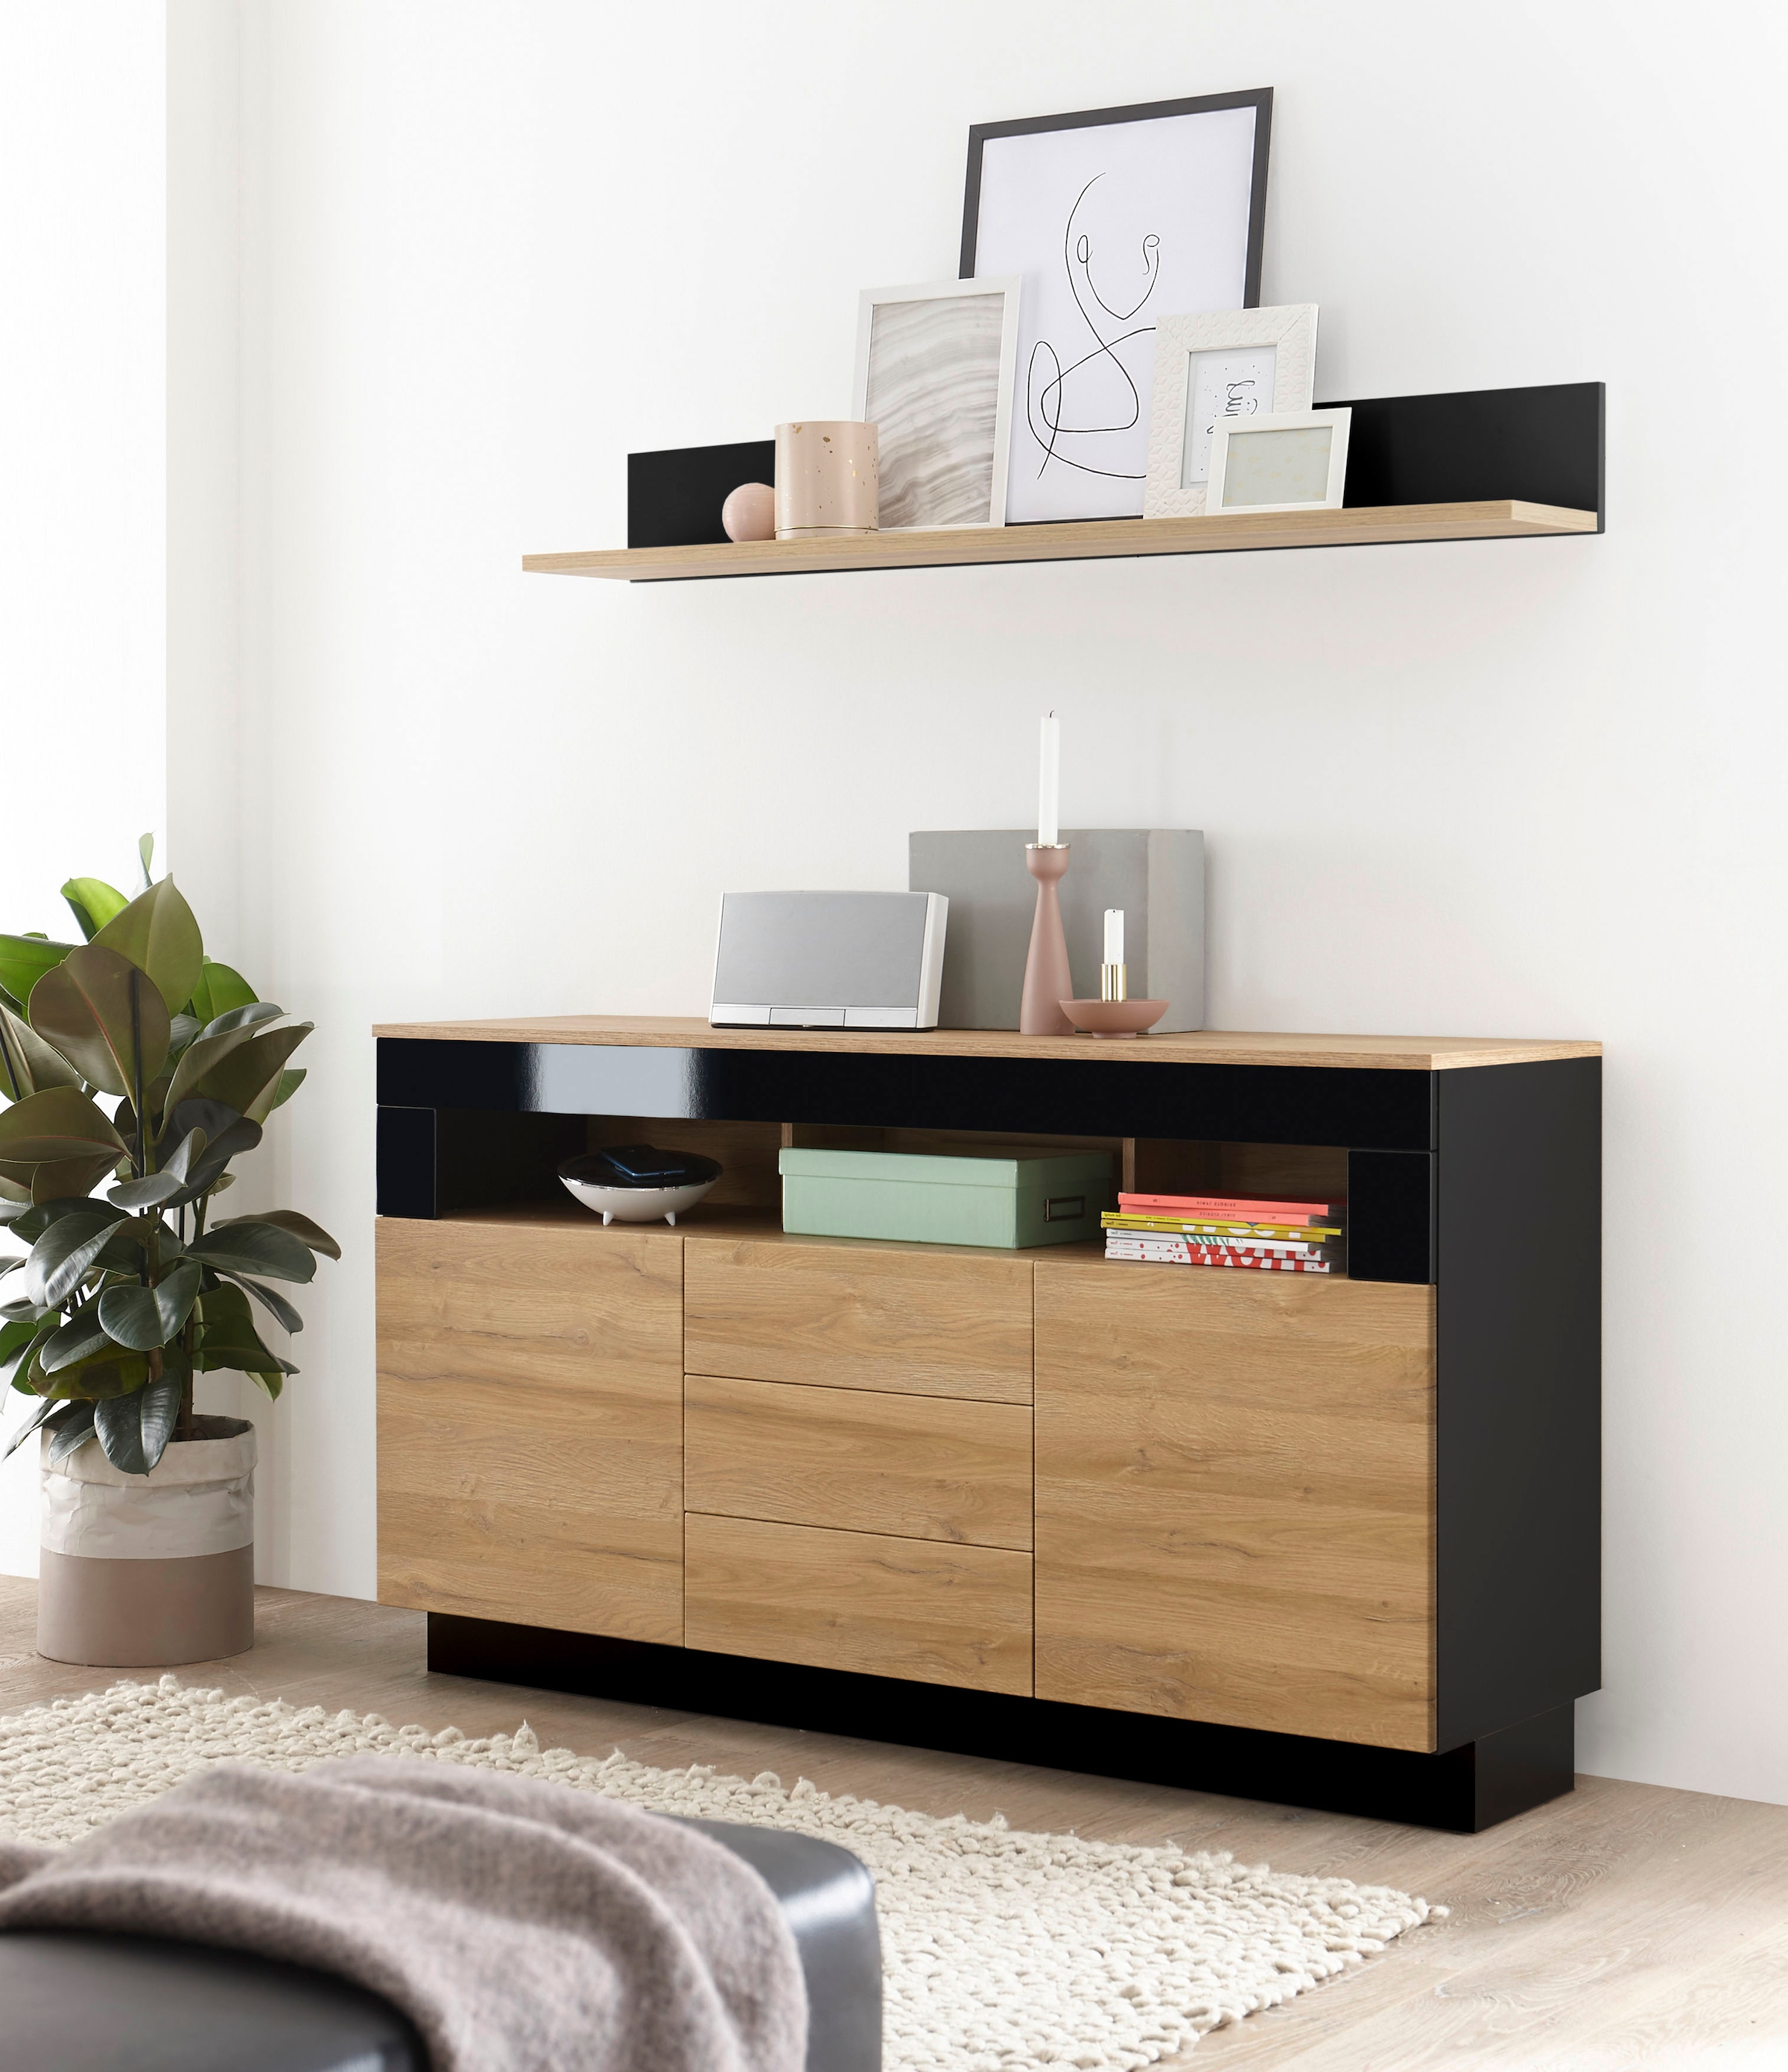 Places of Style Sideboard »Cayman«, Trouver ca. cm Breite 150 sur